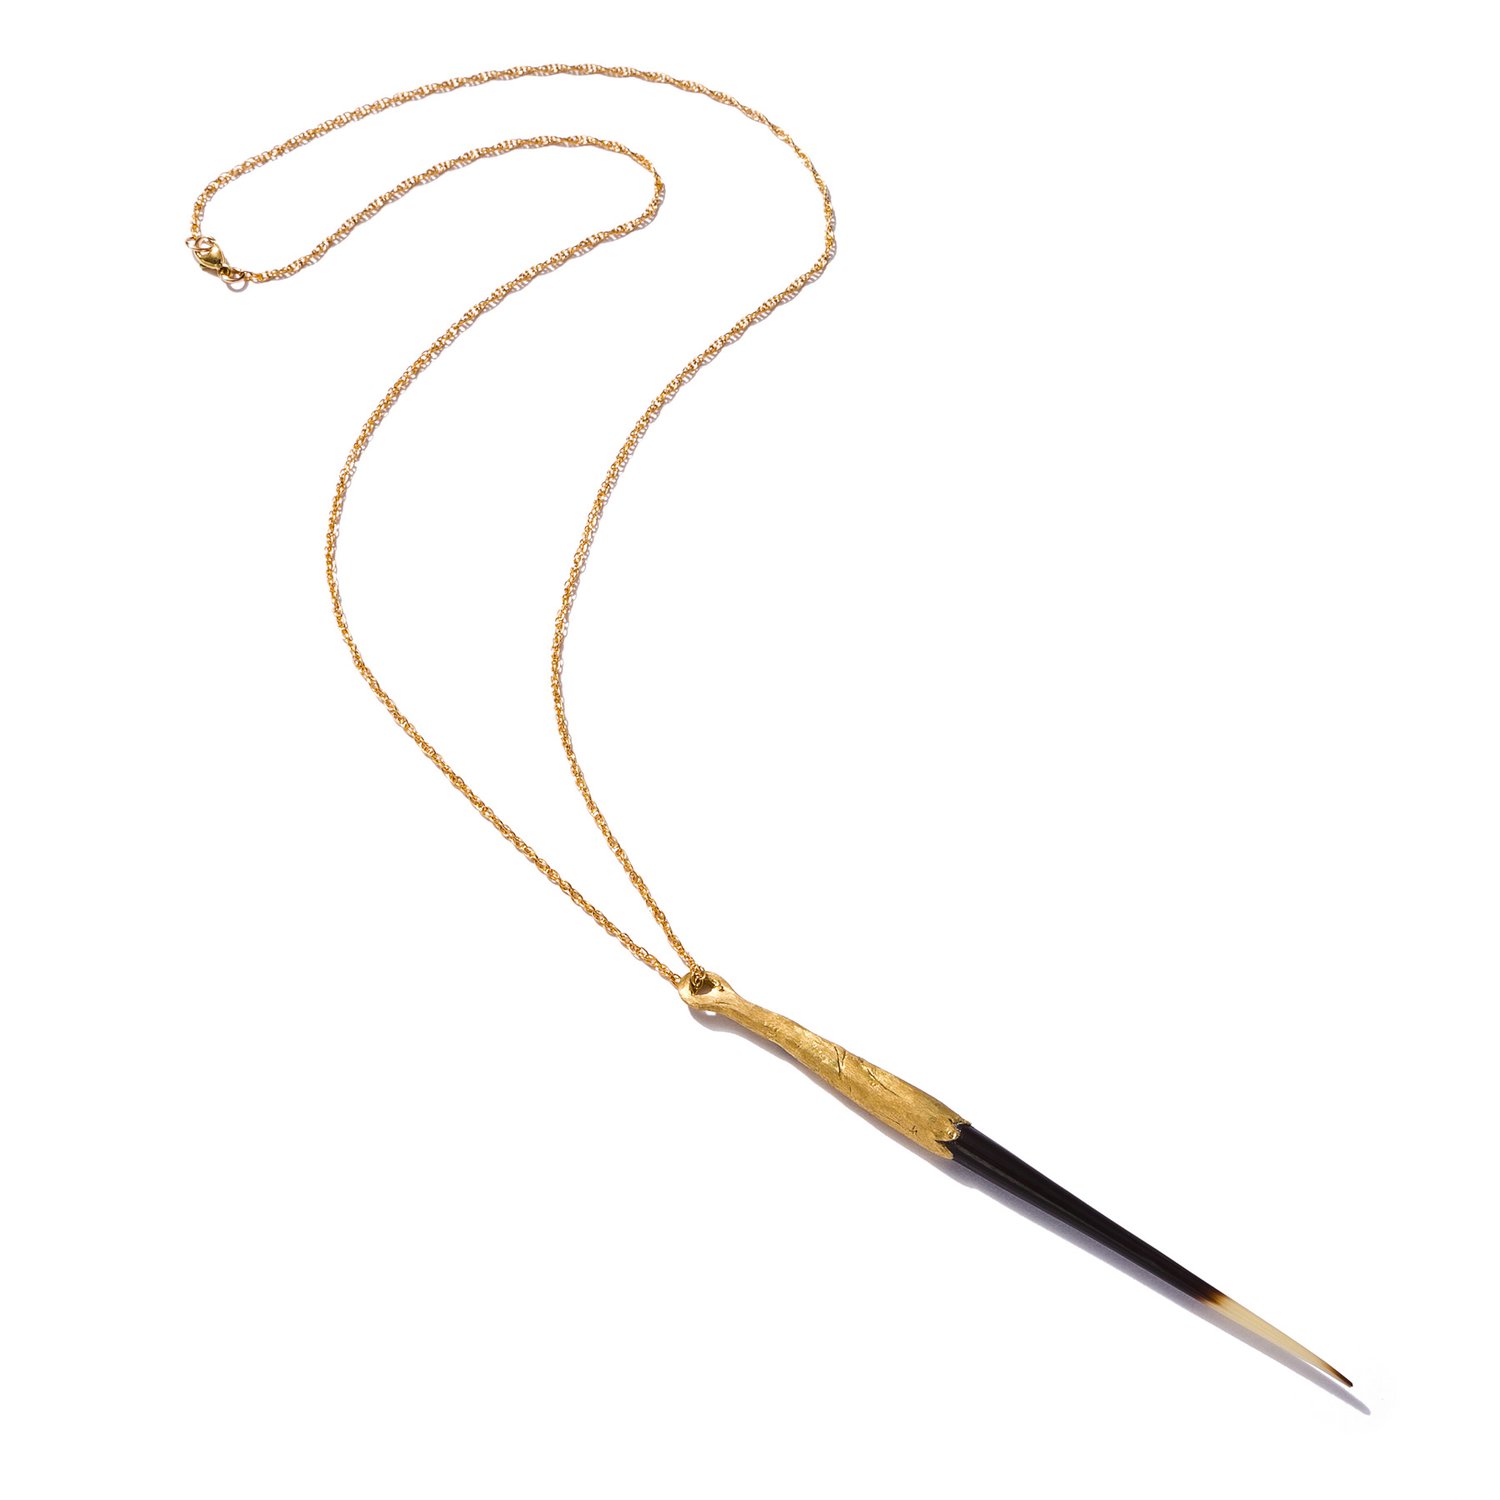 Image of Porcupine Quill in Gold Setting